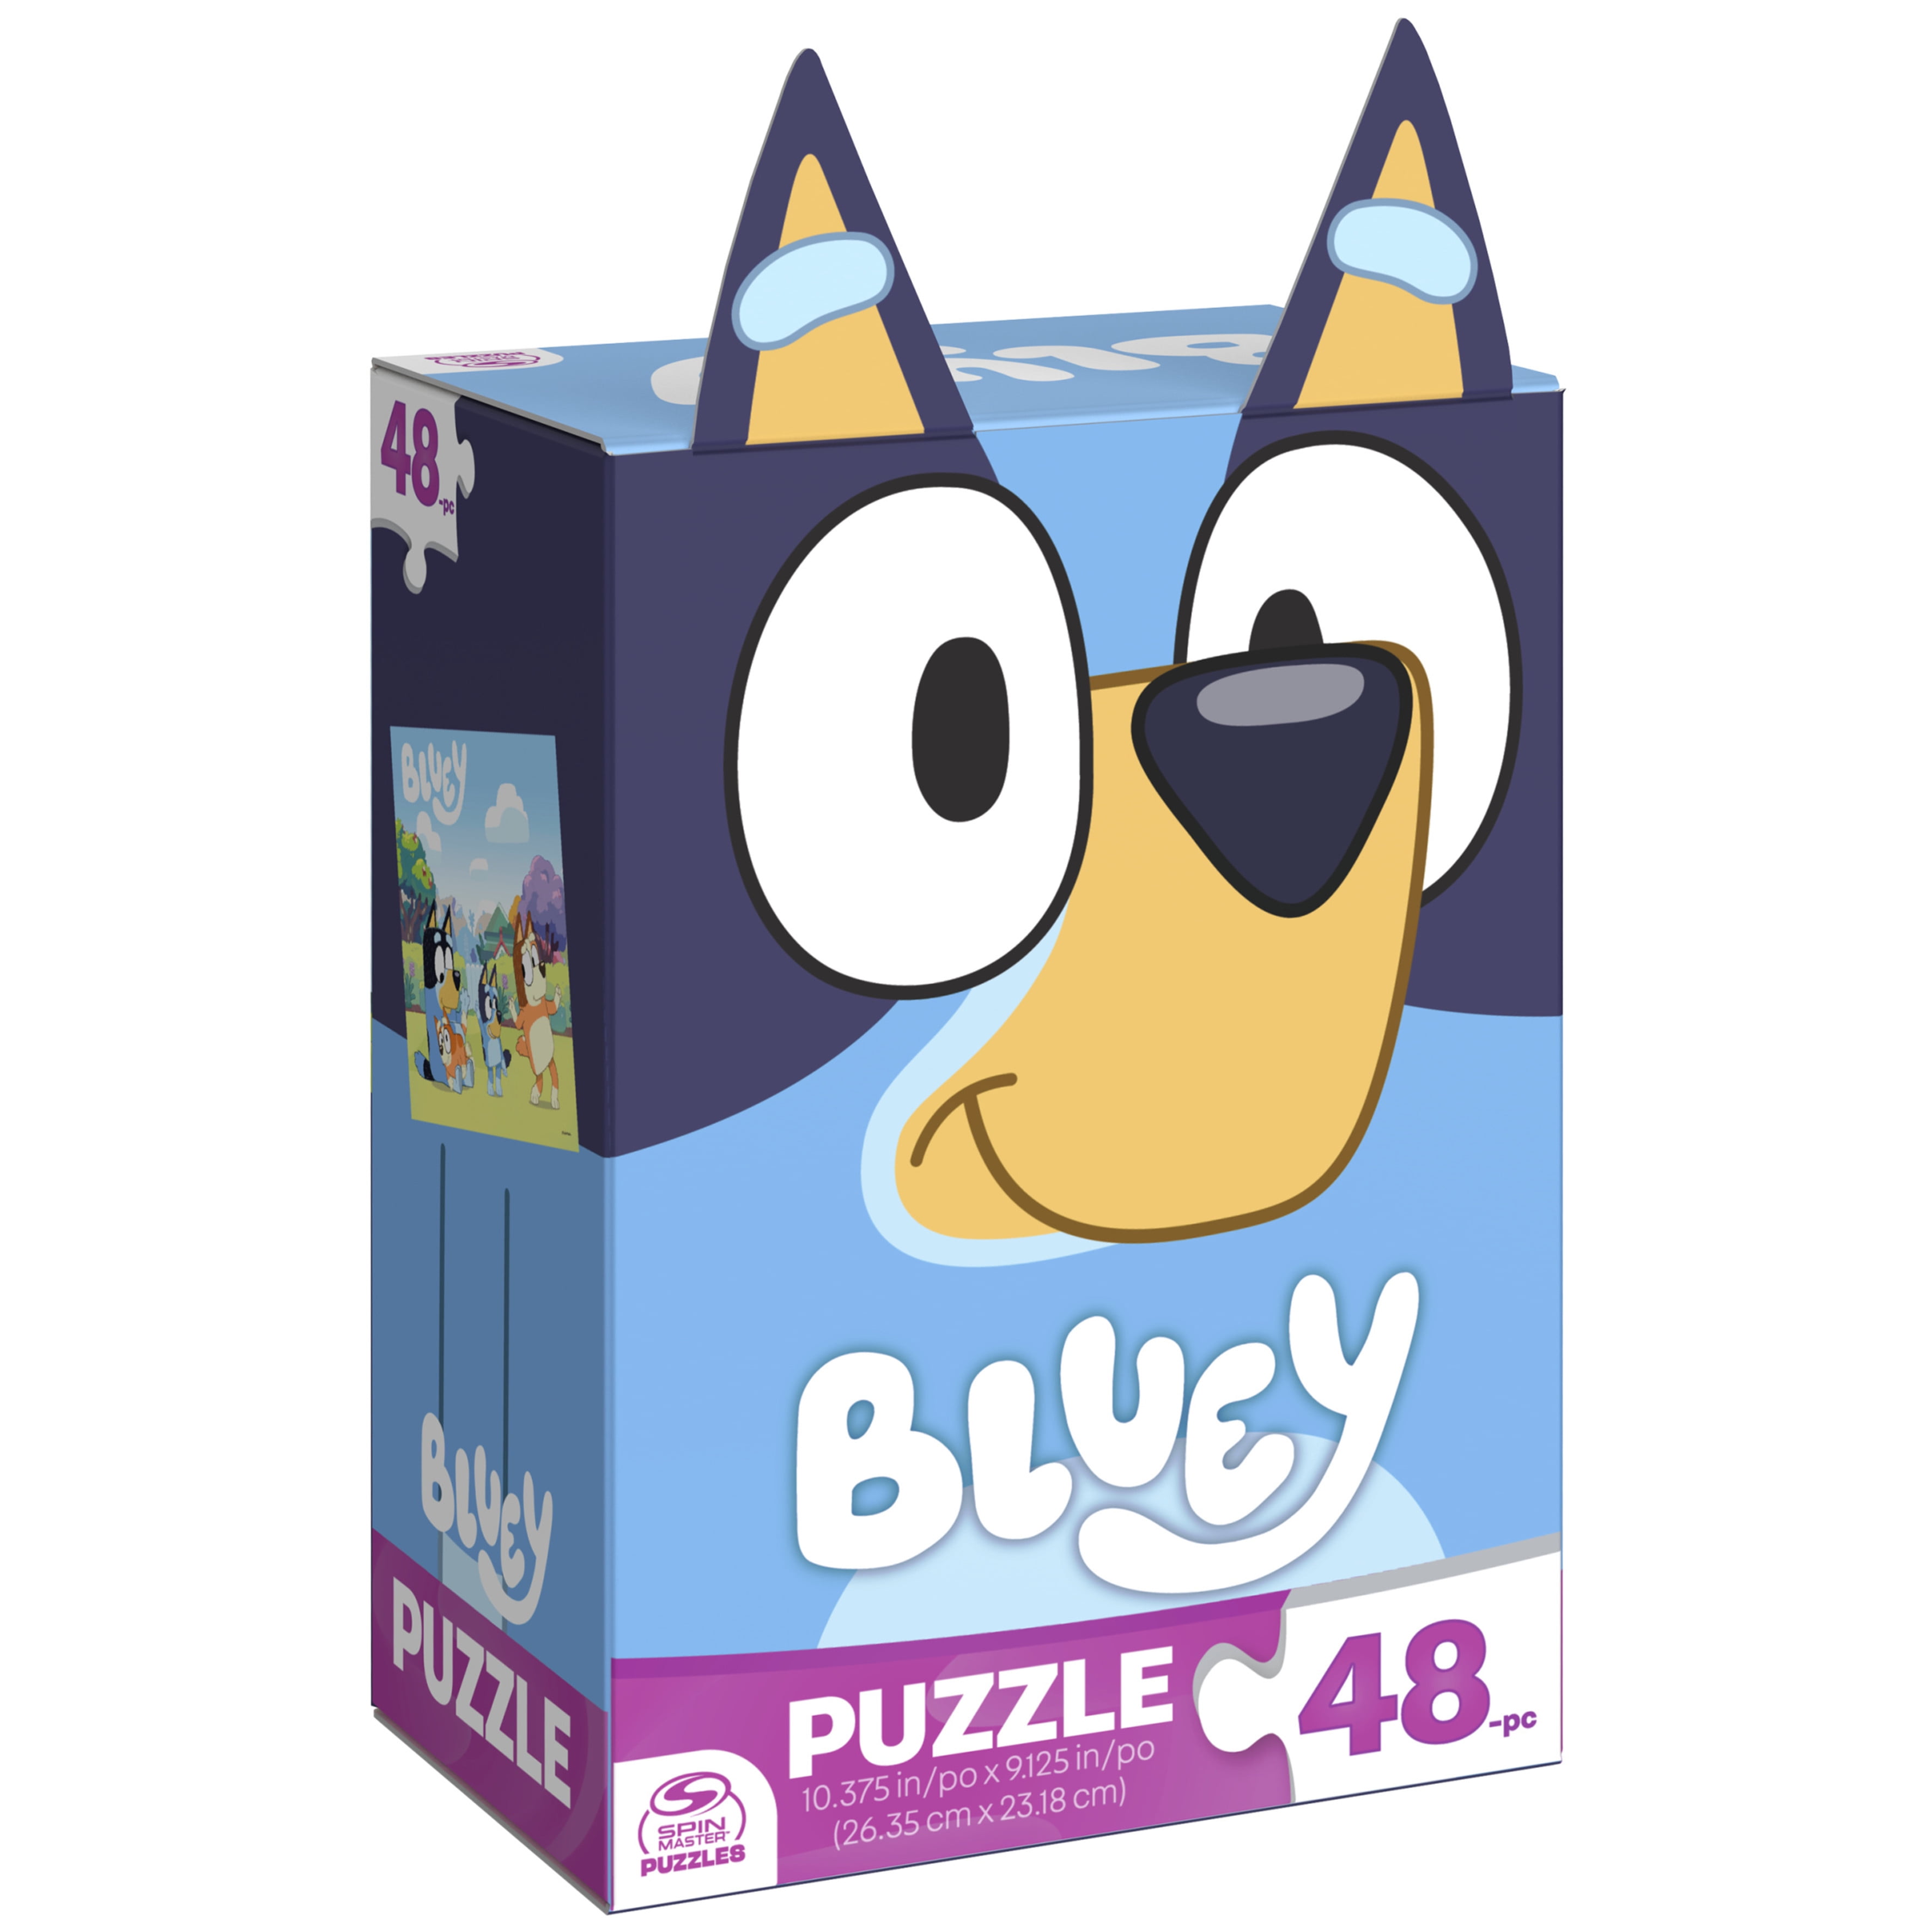 Bluey, 48-Piece Jigsaw Puzzle with Gift Box, for Kids Ages 3 and up